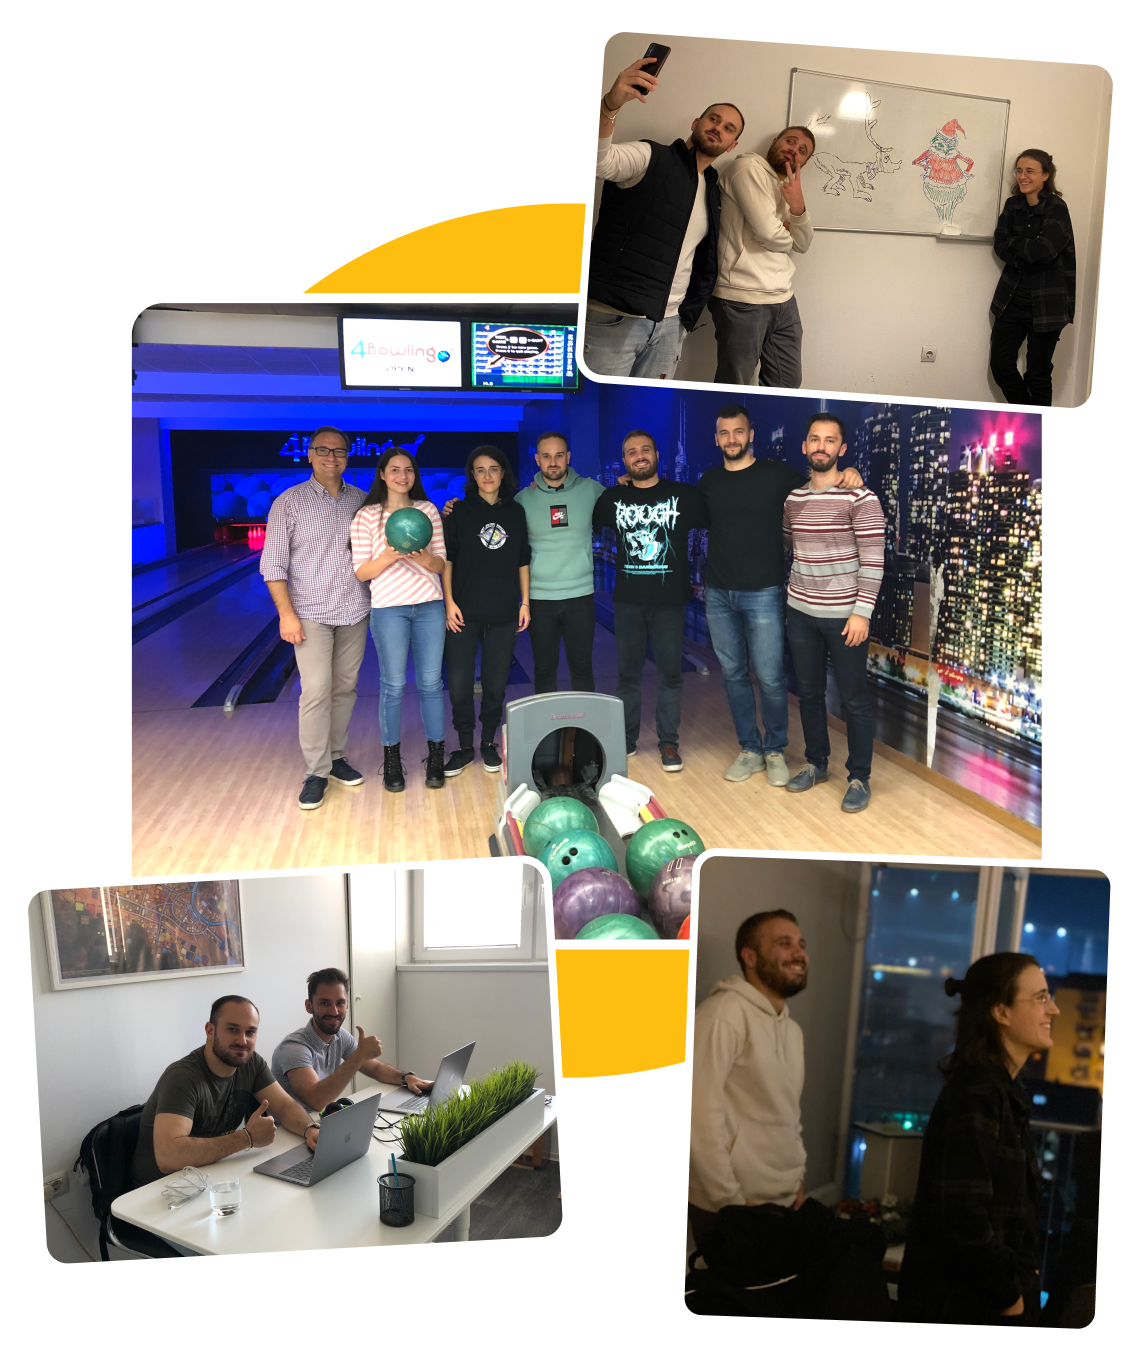 A collage of images with the Coach Microlearning team.